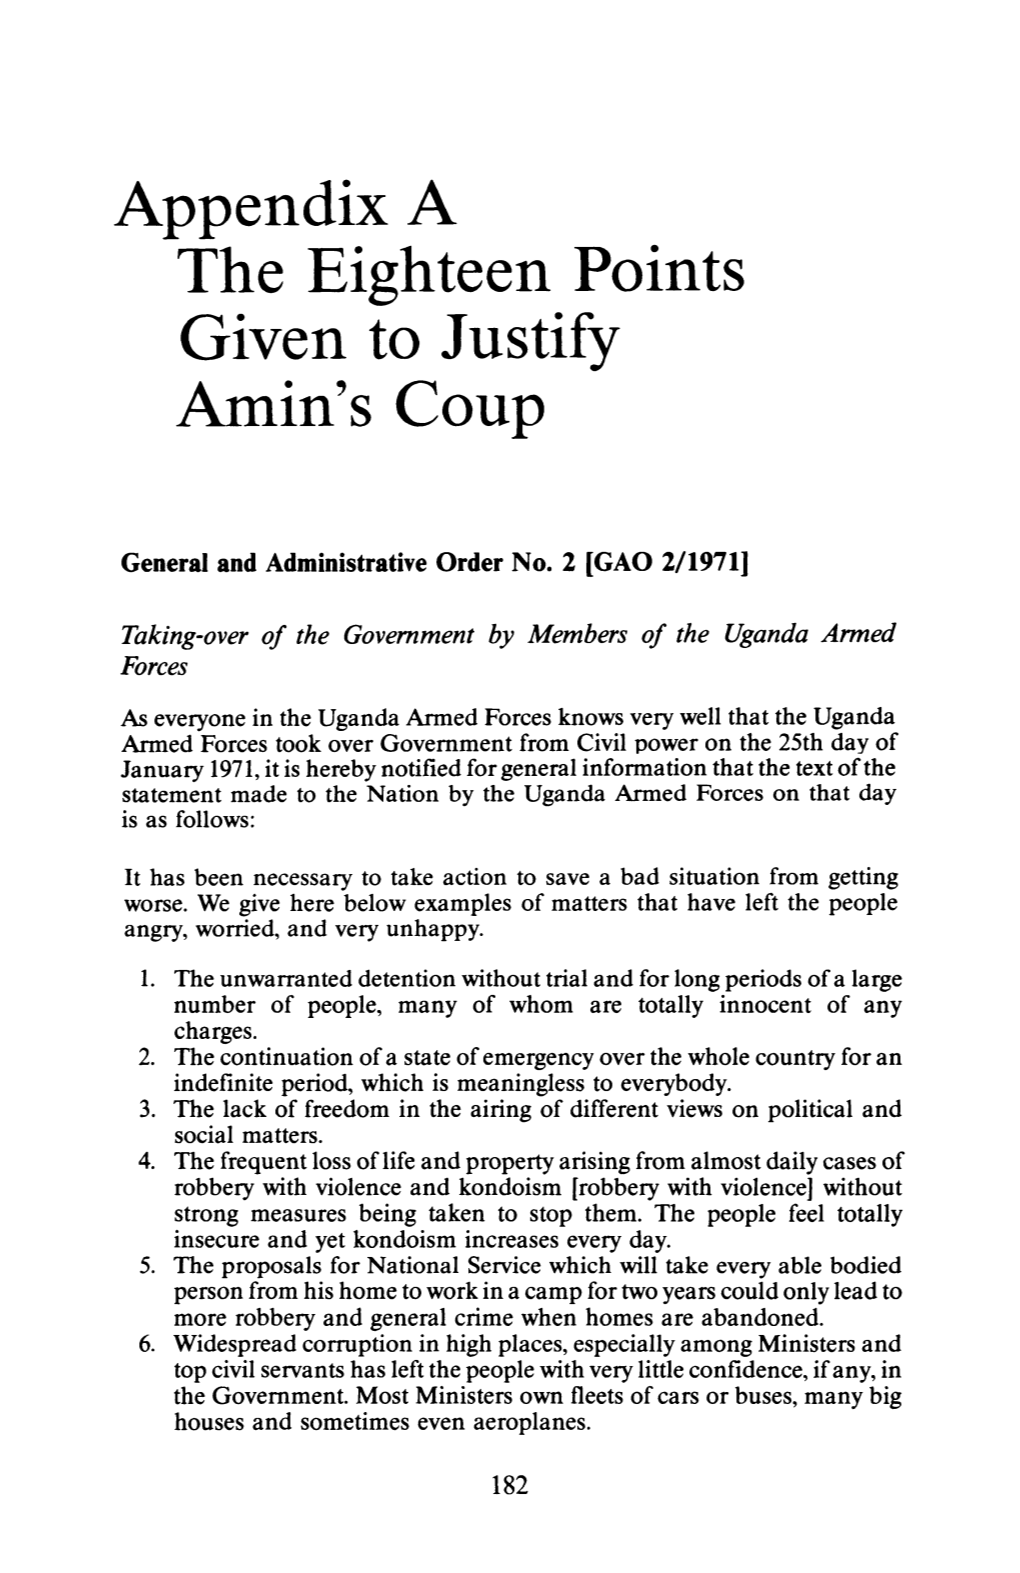 Appendix a the Eighteen Points Given to Justify Amin's Coup